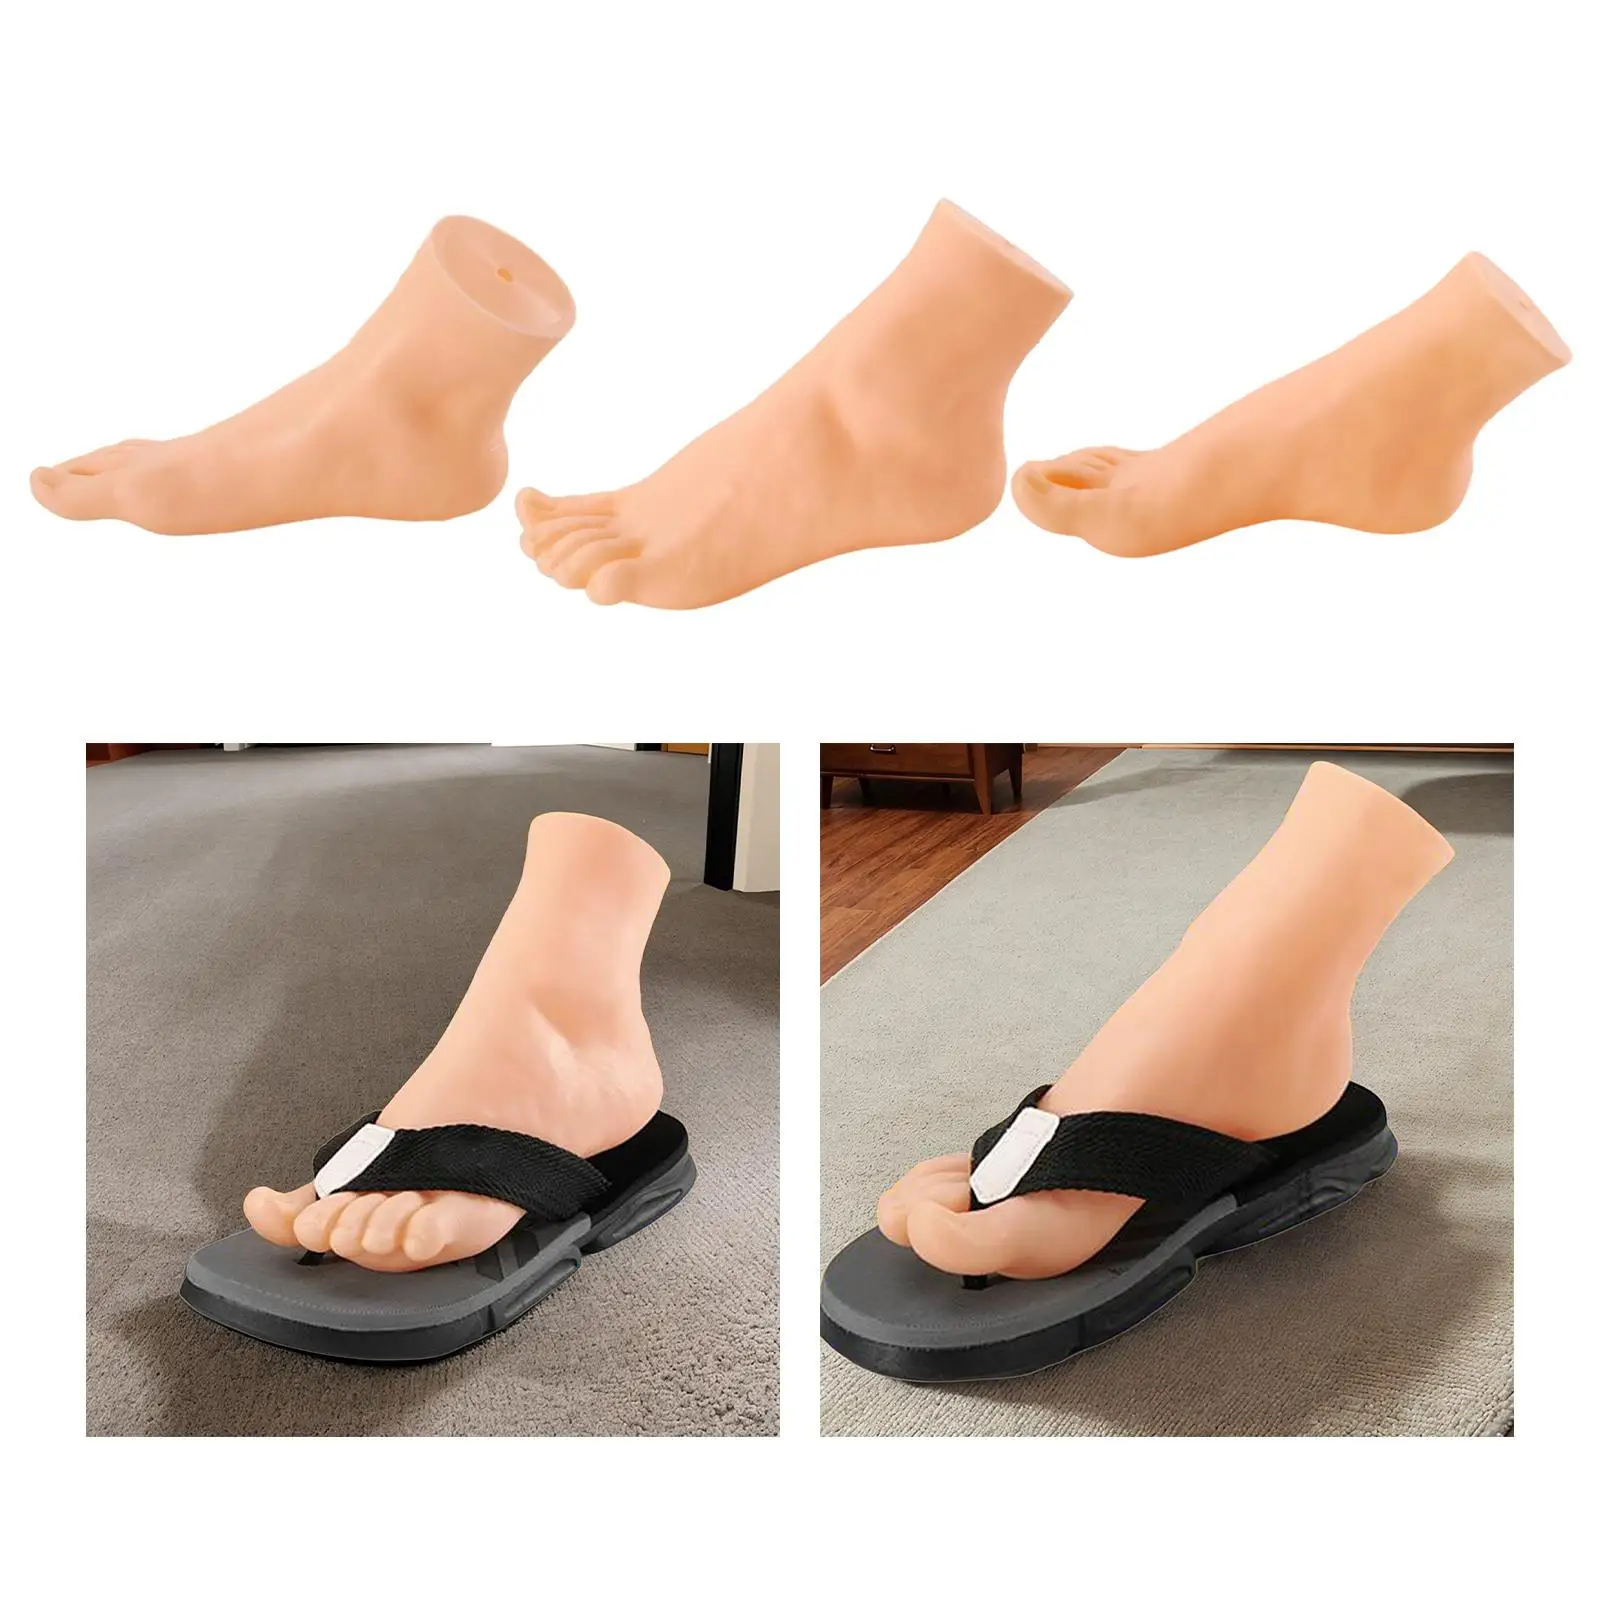 Foot Model Stand Tools Durable Lightweight Mannequin Foot Display Sandals Shoes Sock Display for Retail Home Shop Chains Socks